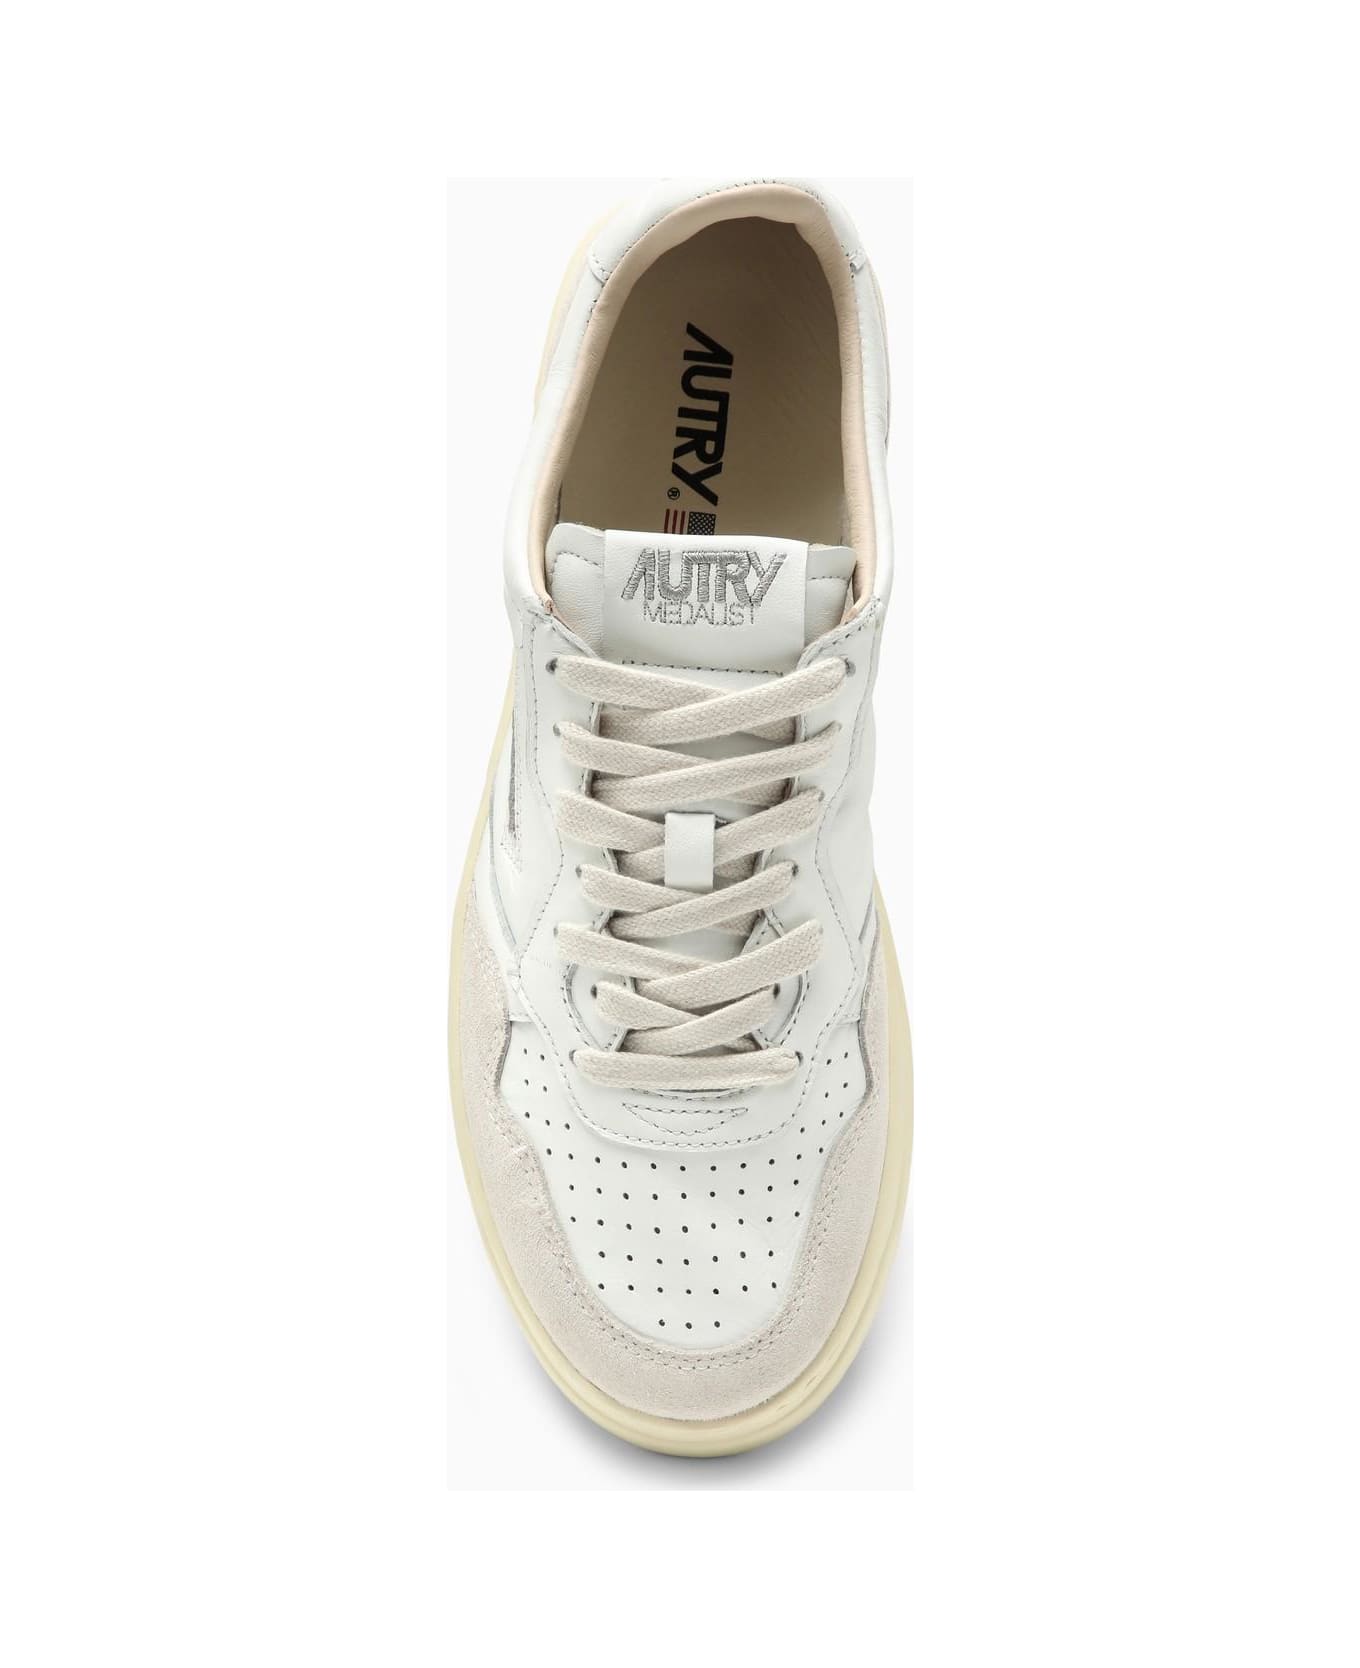 Autry Medalist Trainer In White Leather And Suede - White スニーカー